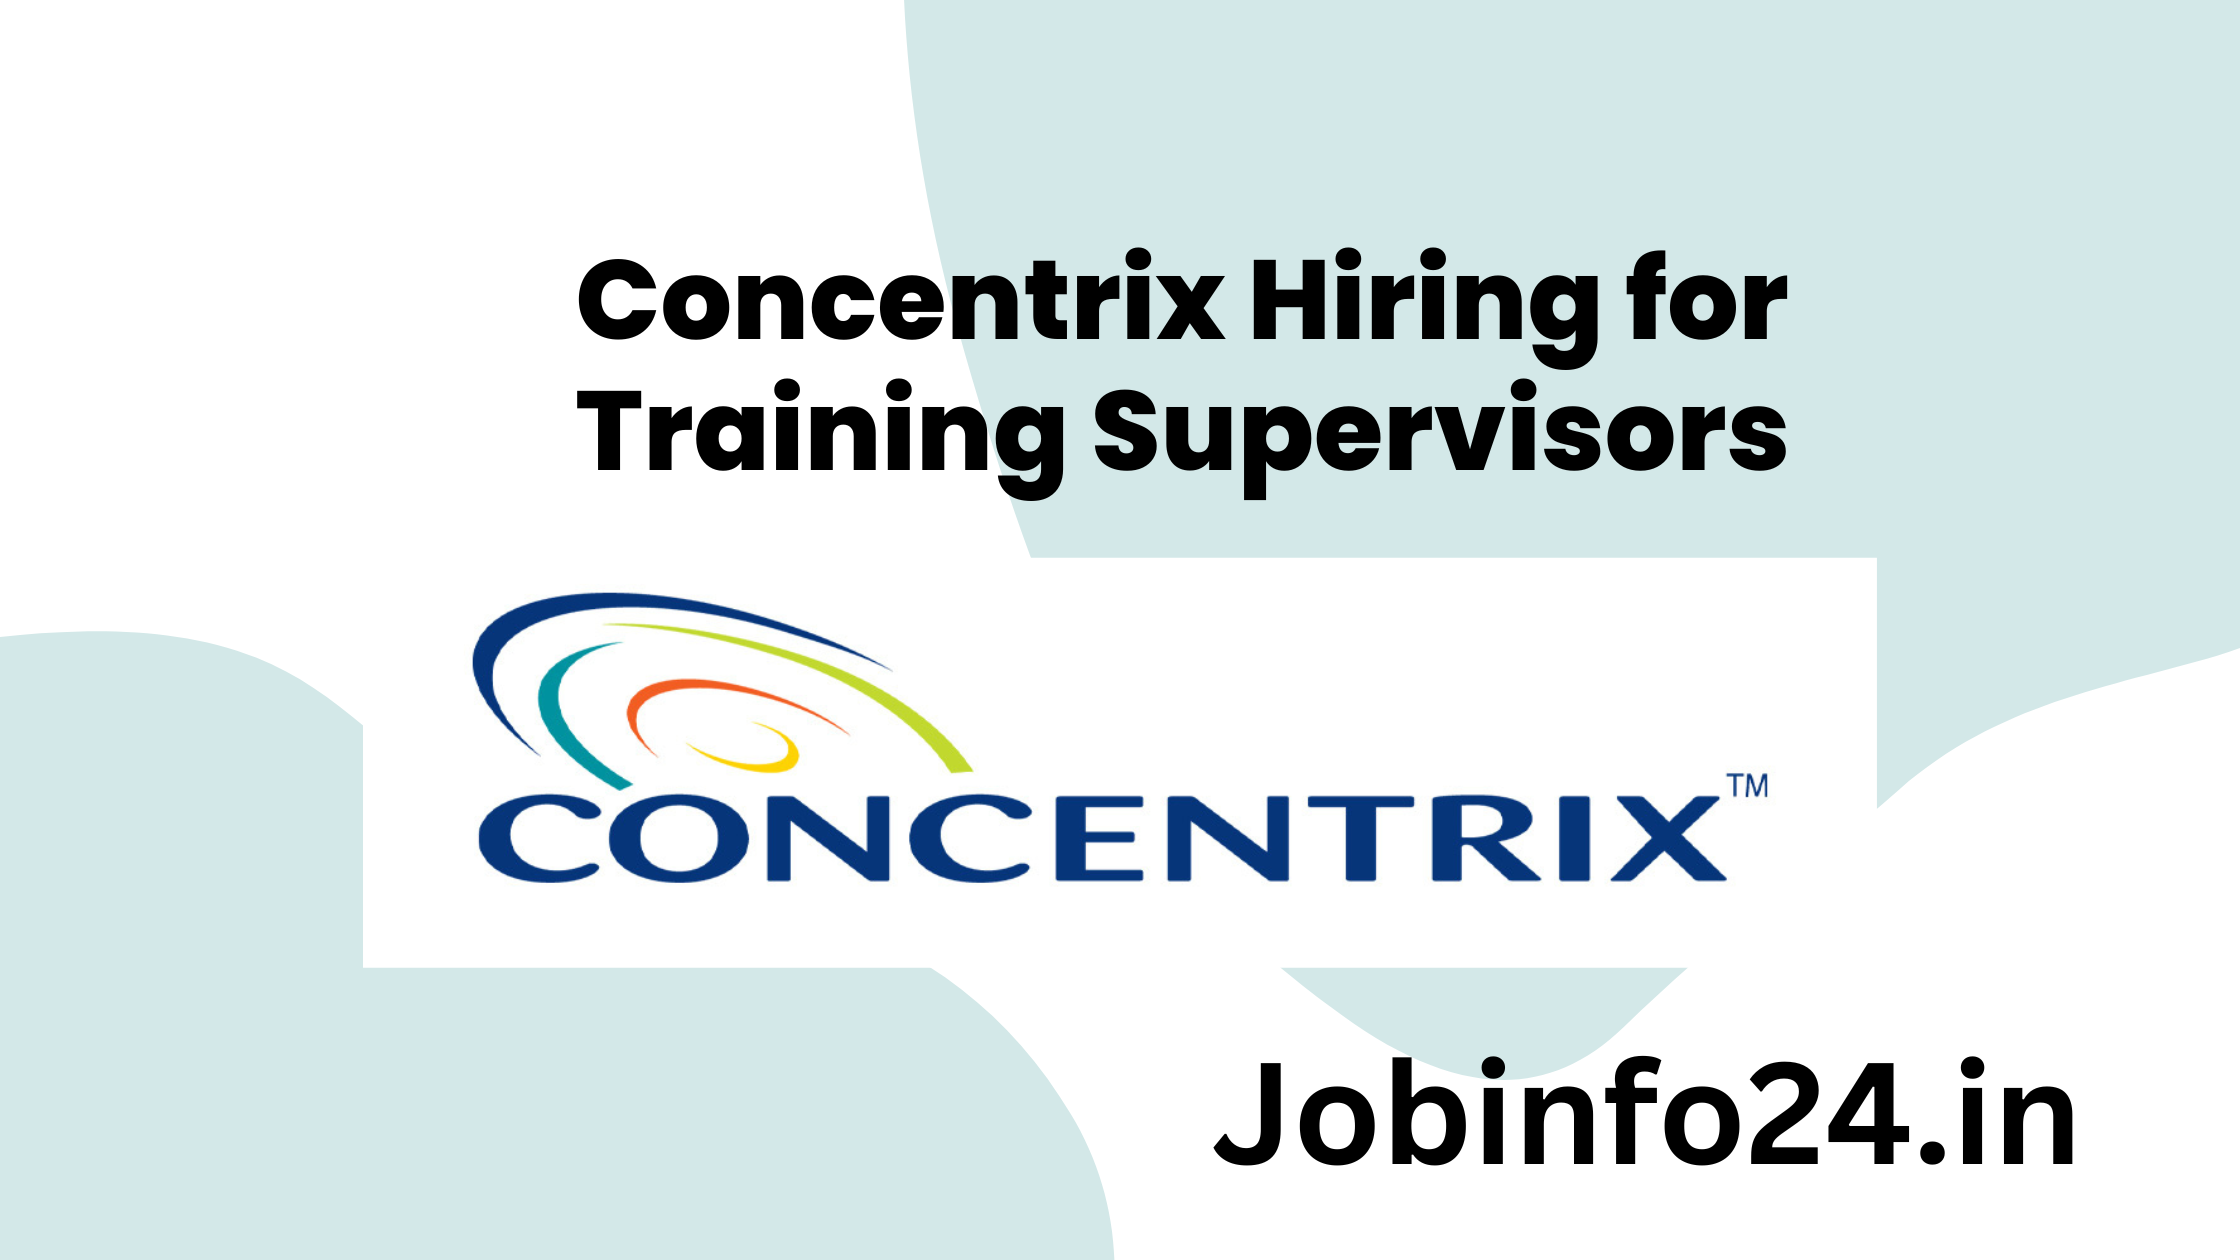 Concentrix Hiring for Training Supervisors